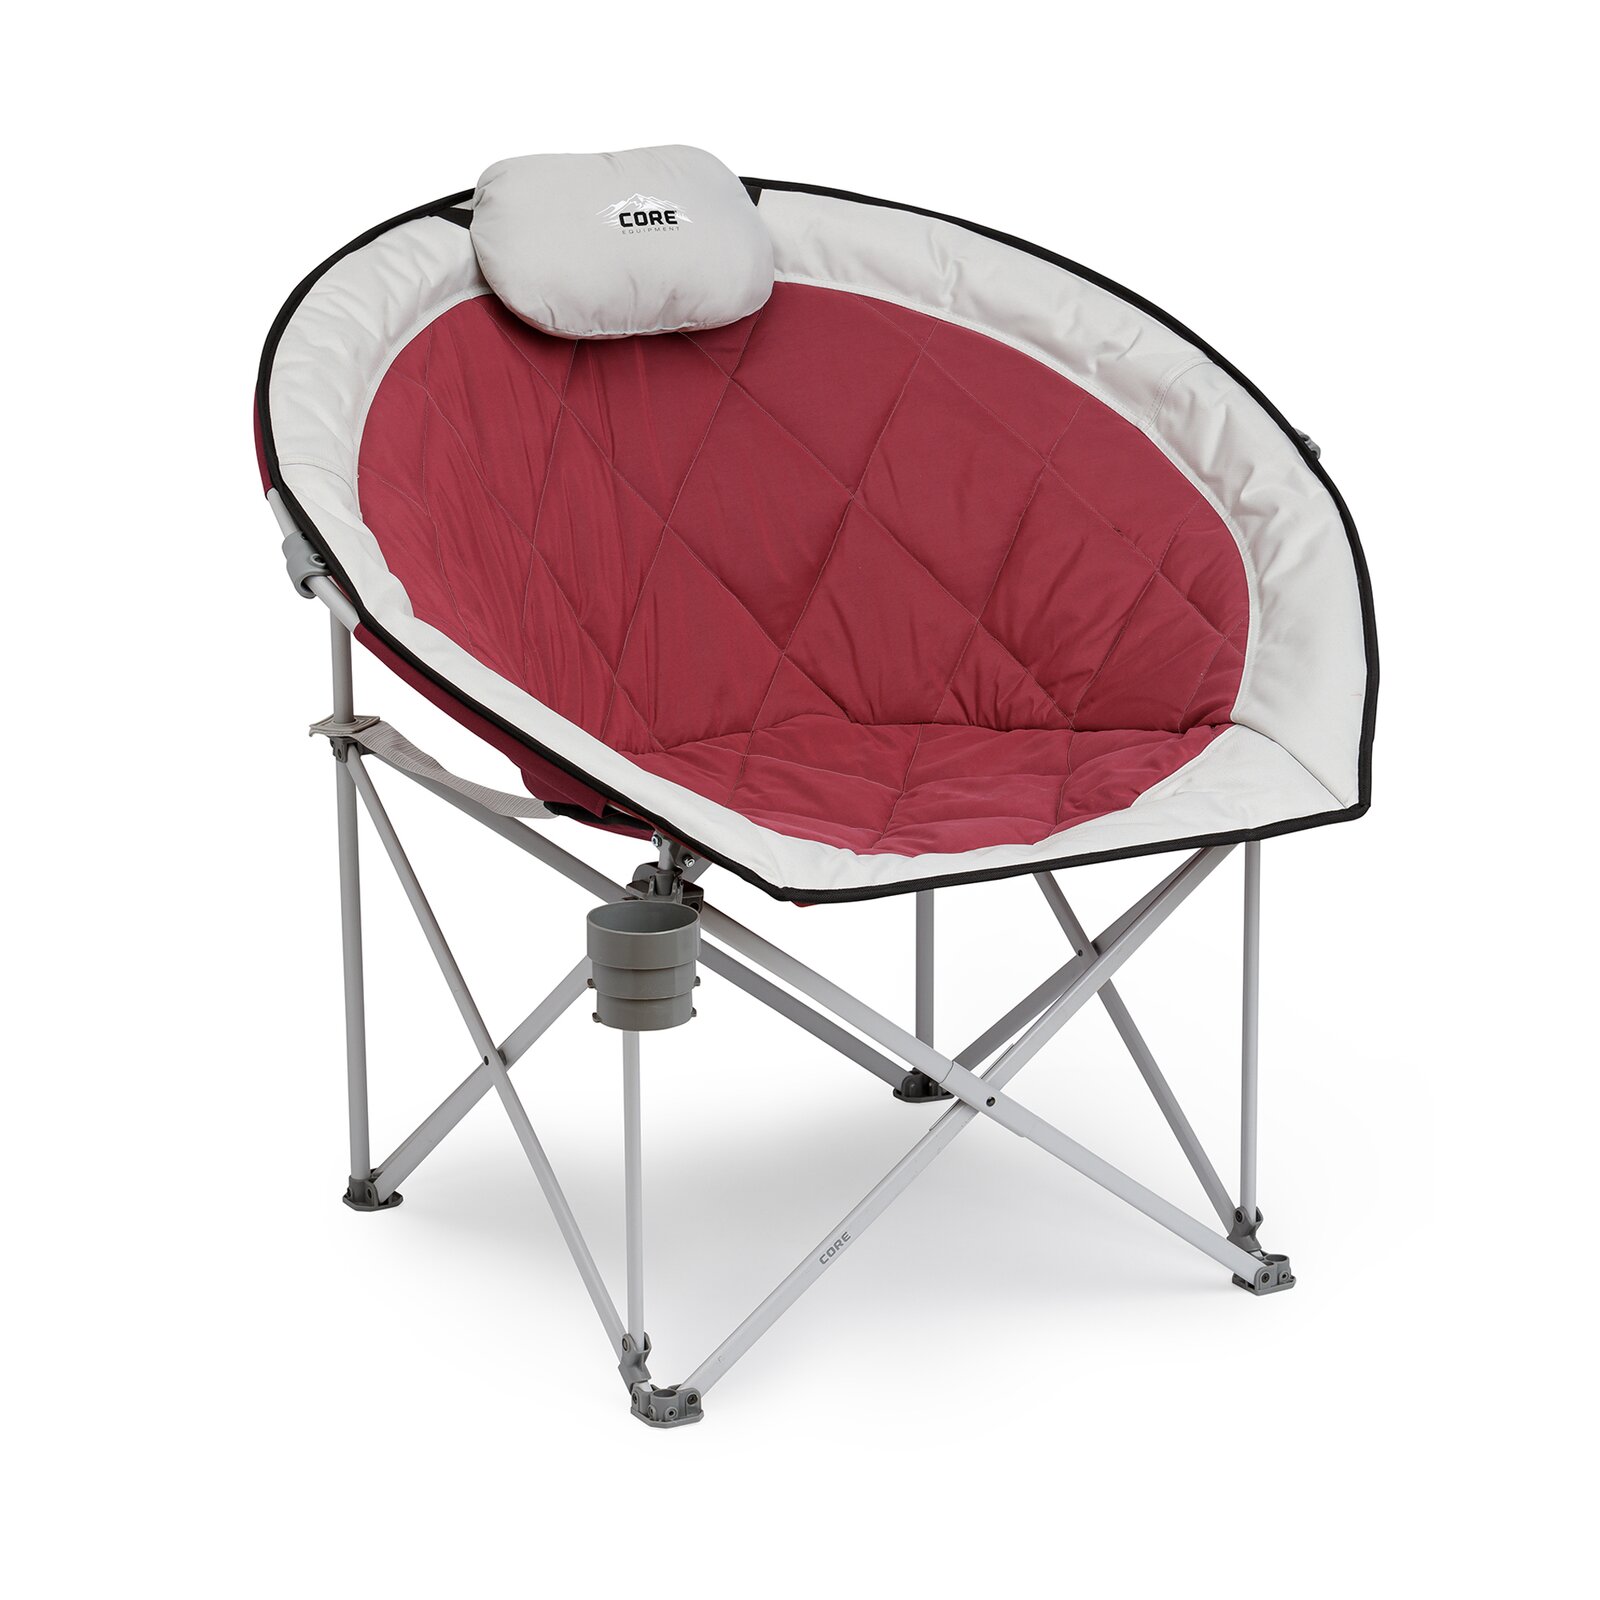 Core Equipment Oversized Padded Round Moon Outdoor Camping Folding Chair, Wine & Reviews